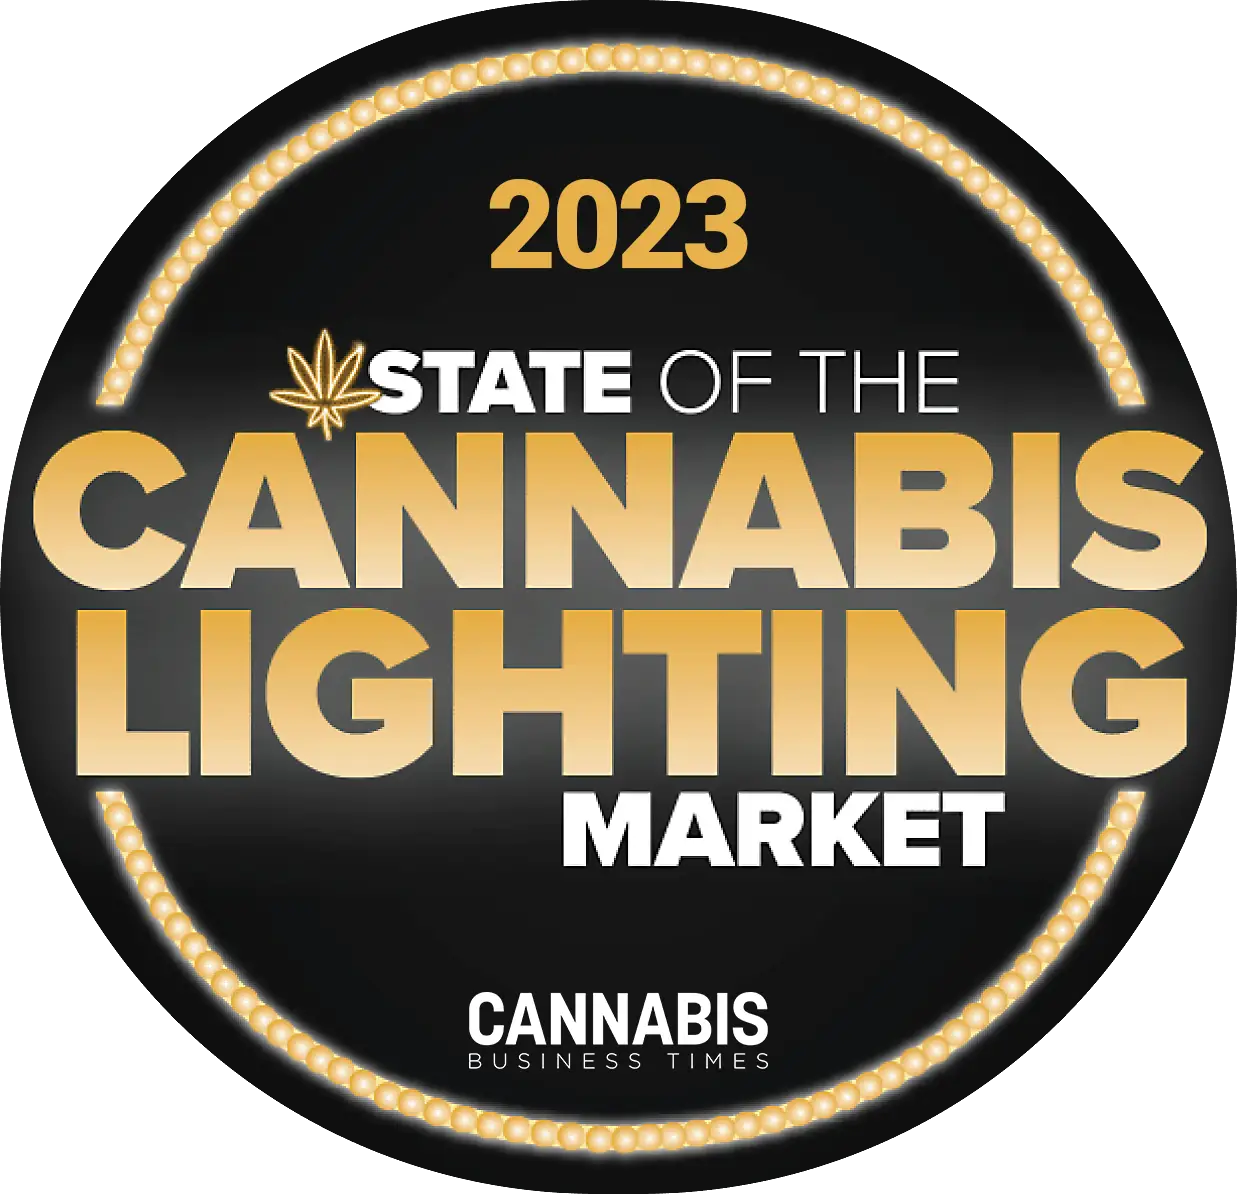 State of the Cannabis Lgihting Market